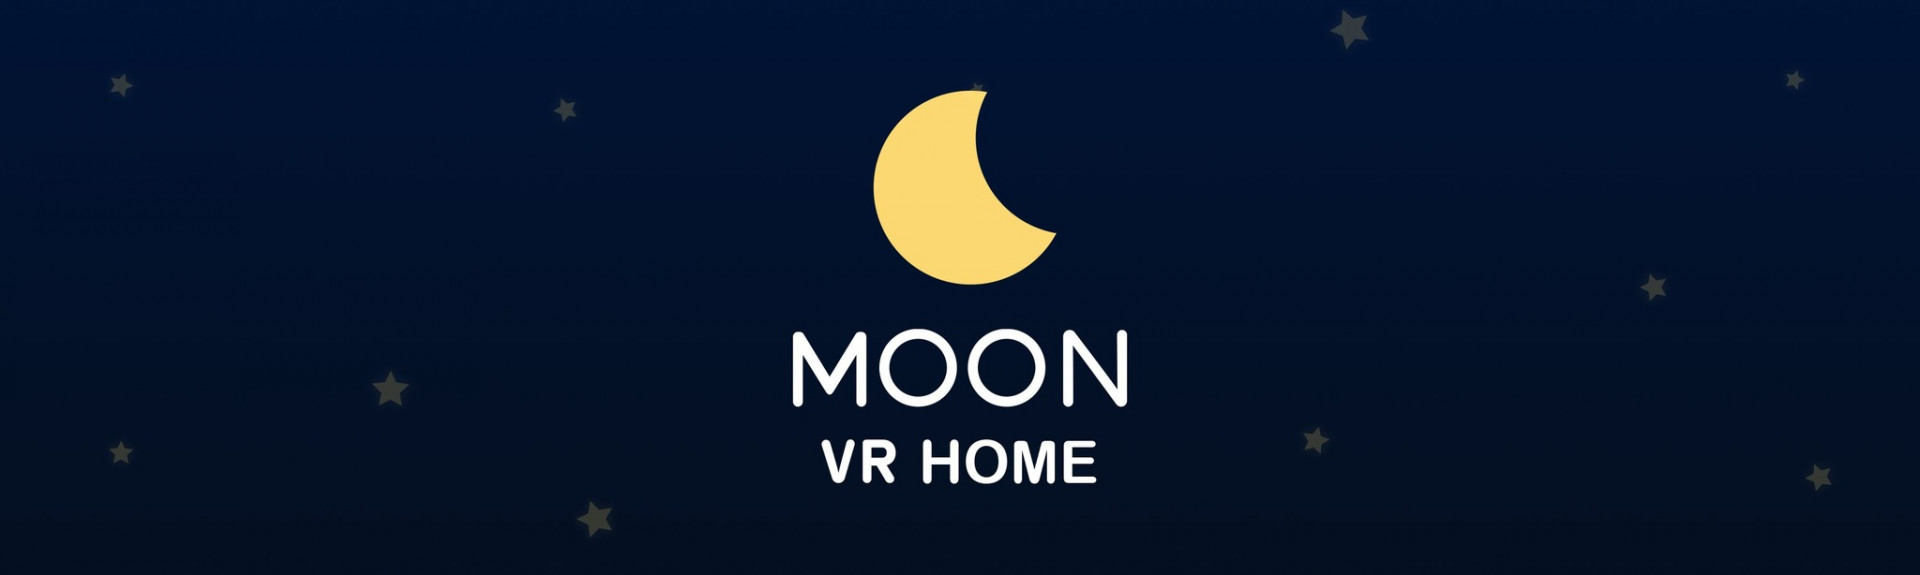 Moon VR Home